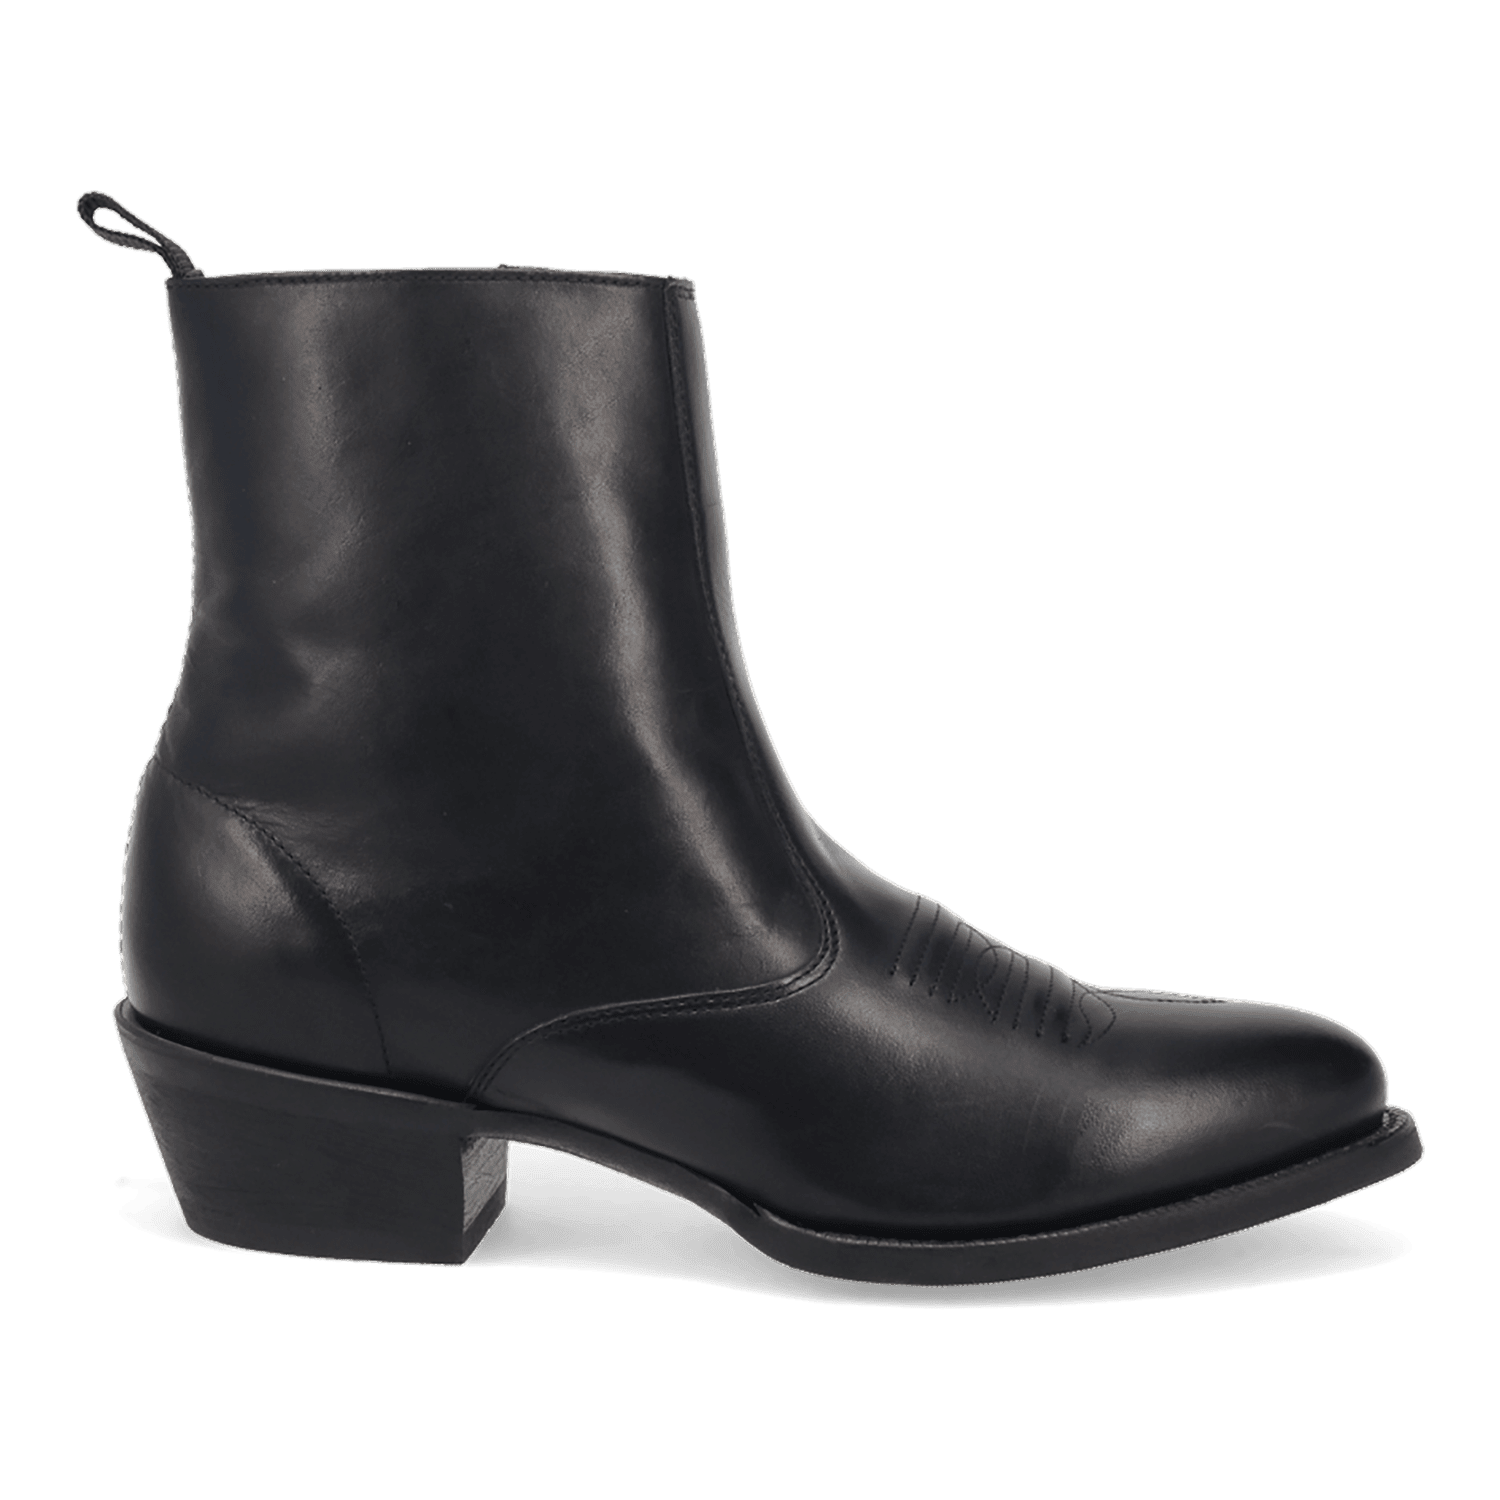 FLETCHER LEATHER BOOT Image